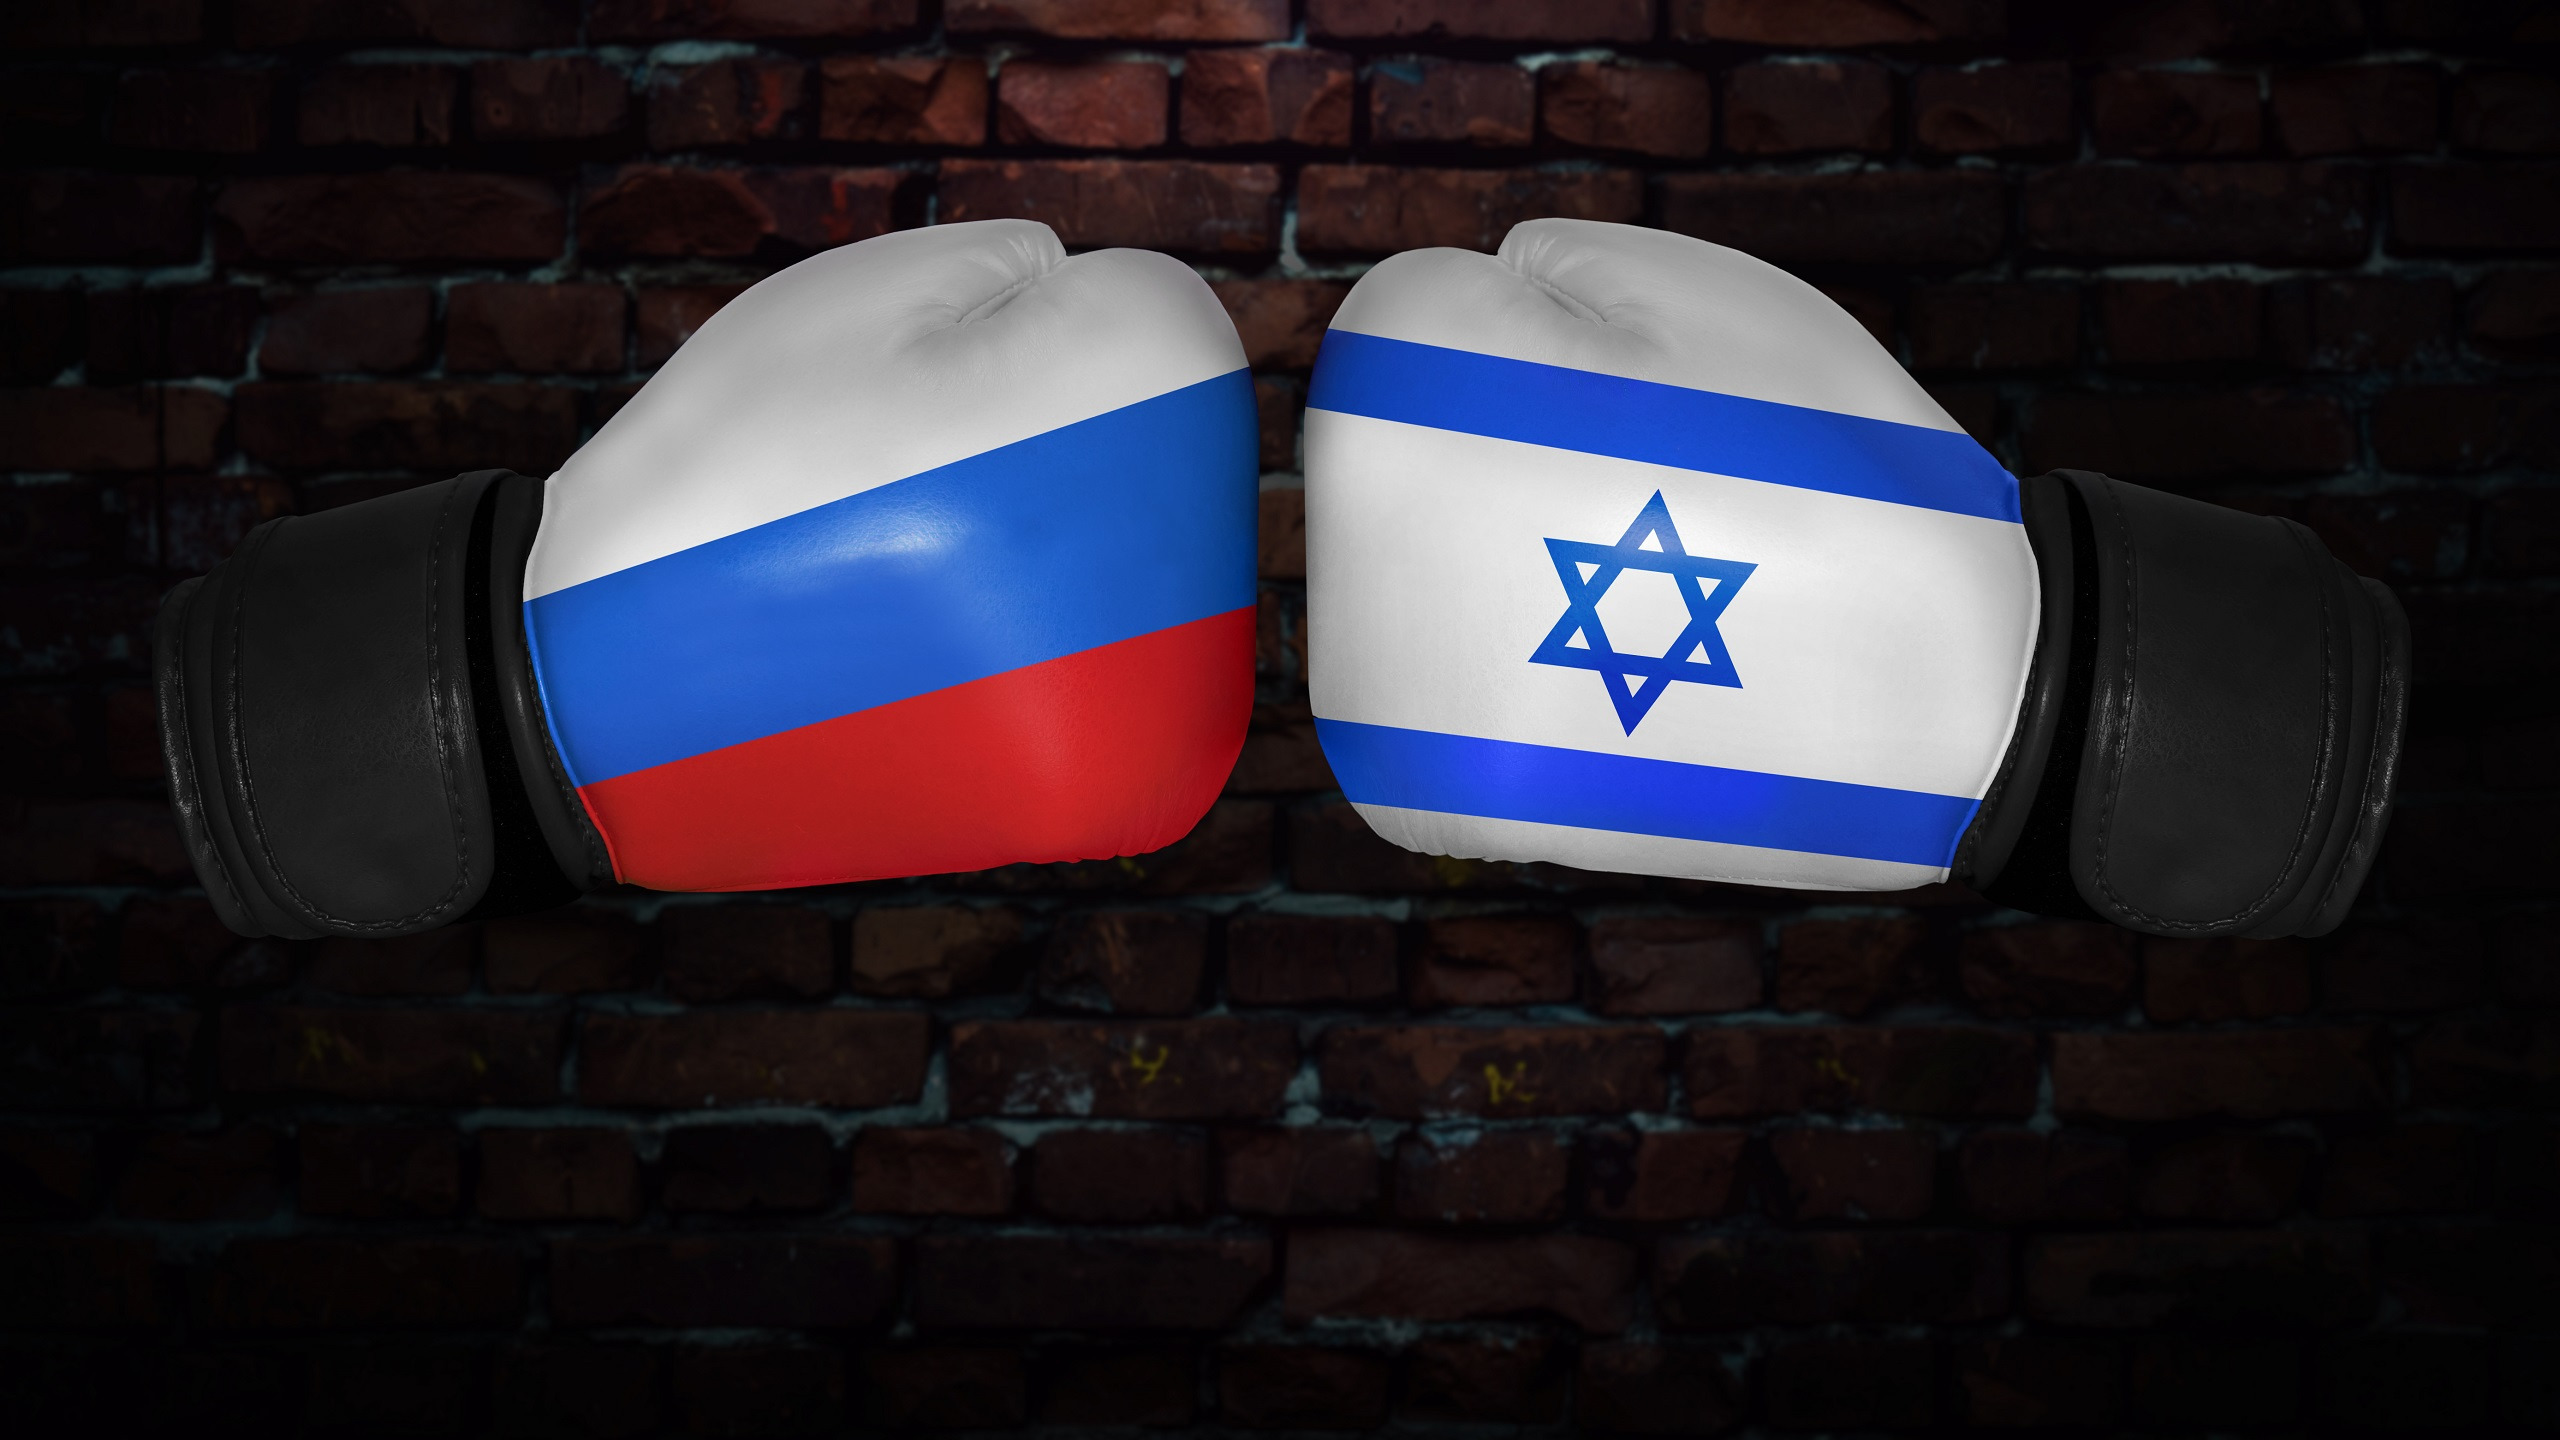 Russia Is Using Israel To Distract World From Ukraine, Analysts Say